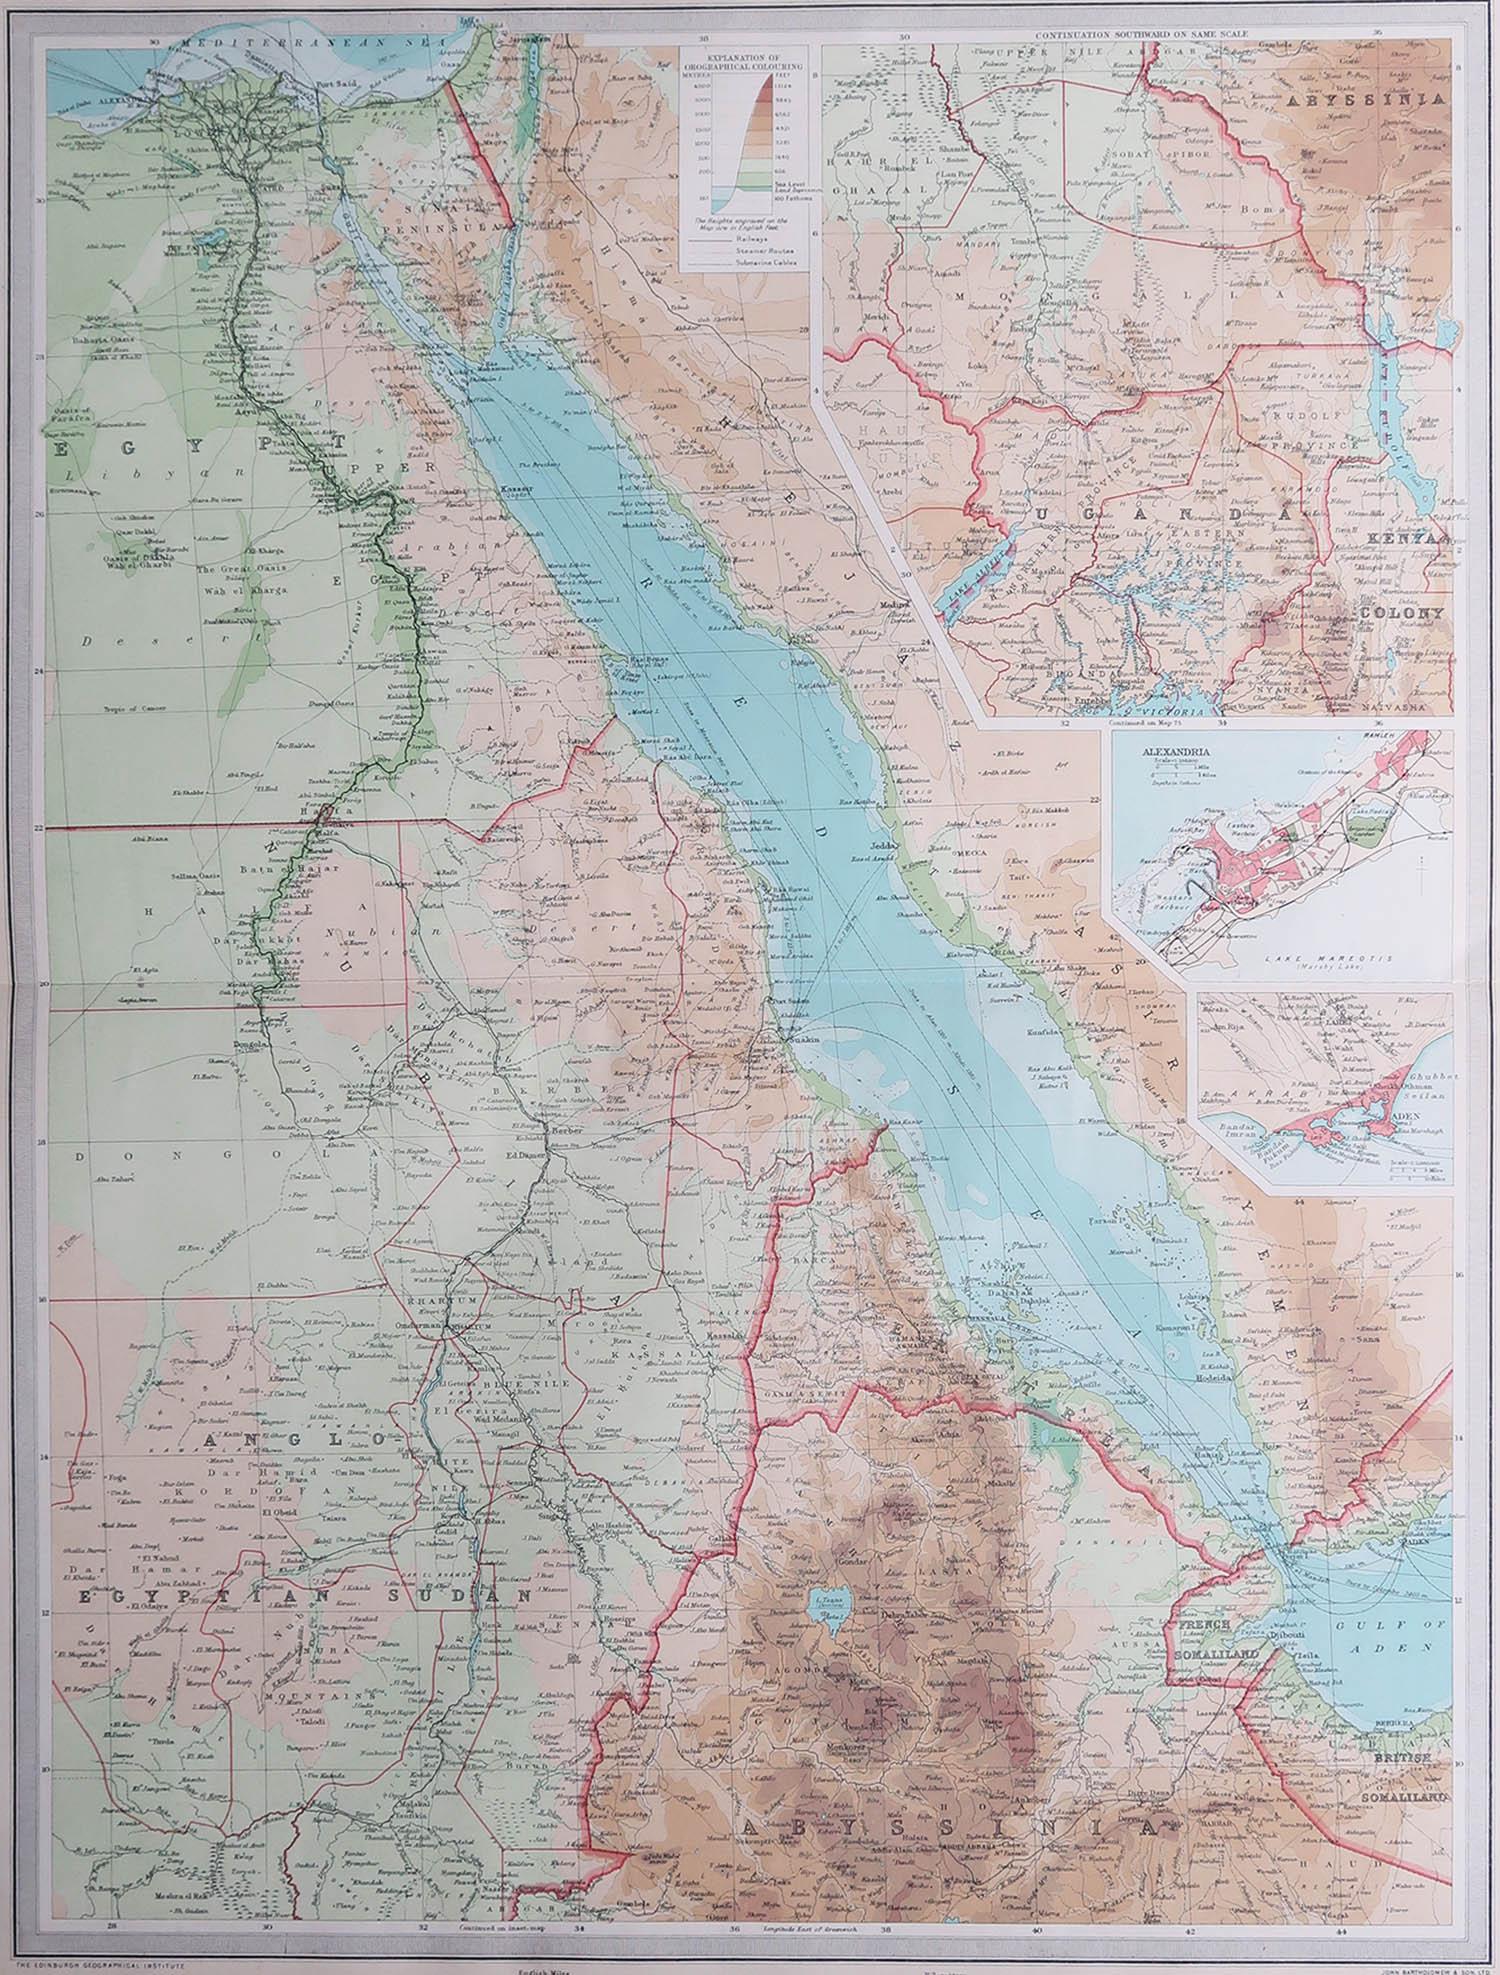 Great map of Egypt

Unframed

Original color

By John Bartholomew and Co. Edinburgh Geographical Institute

Published, circa 1920

Free shipping.
 